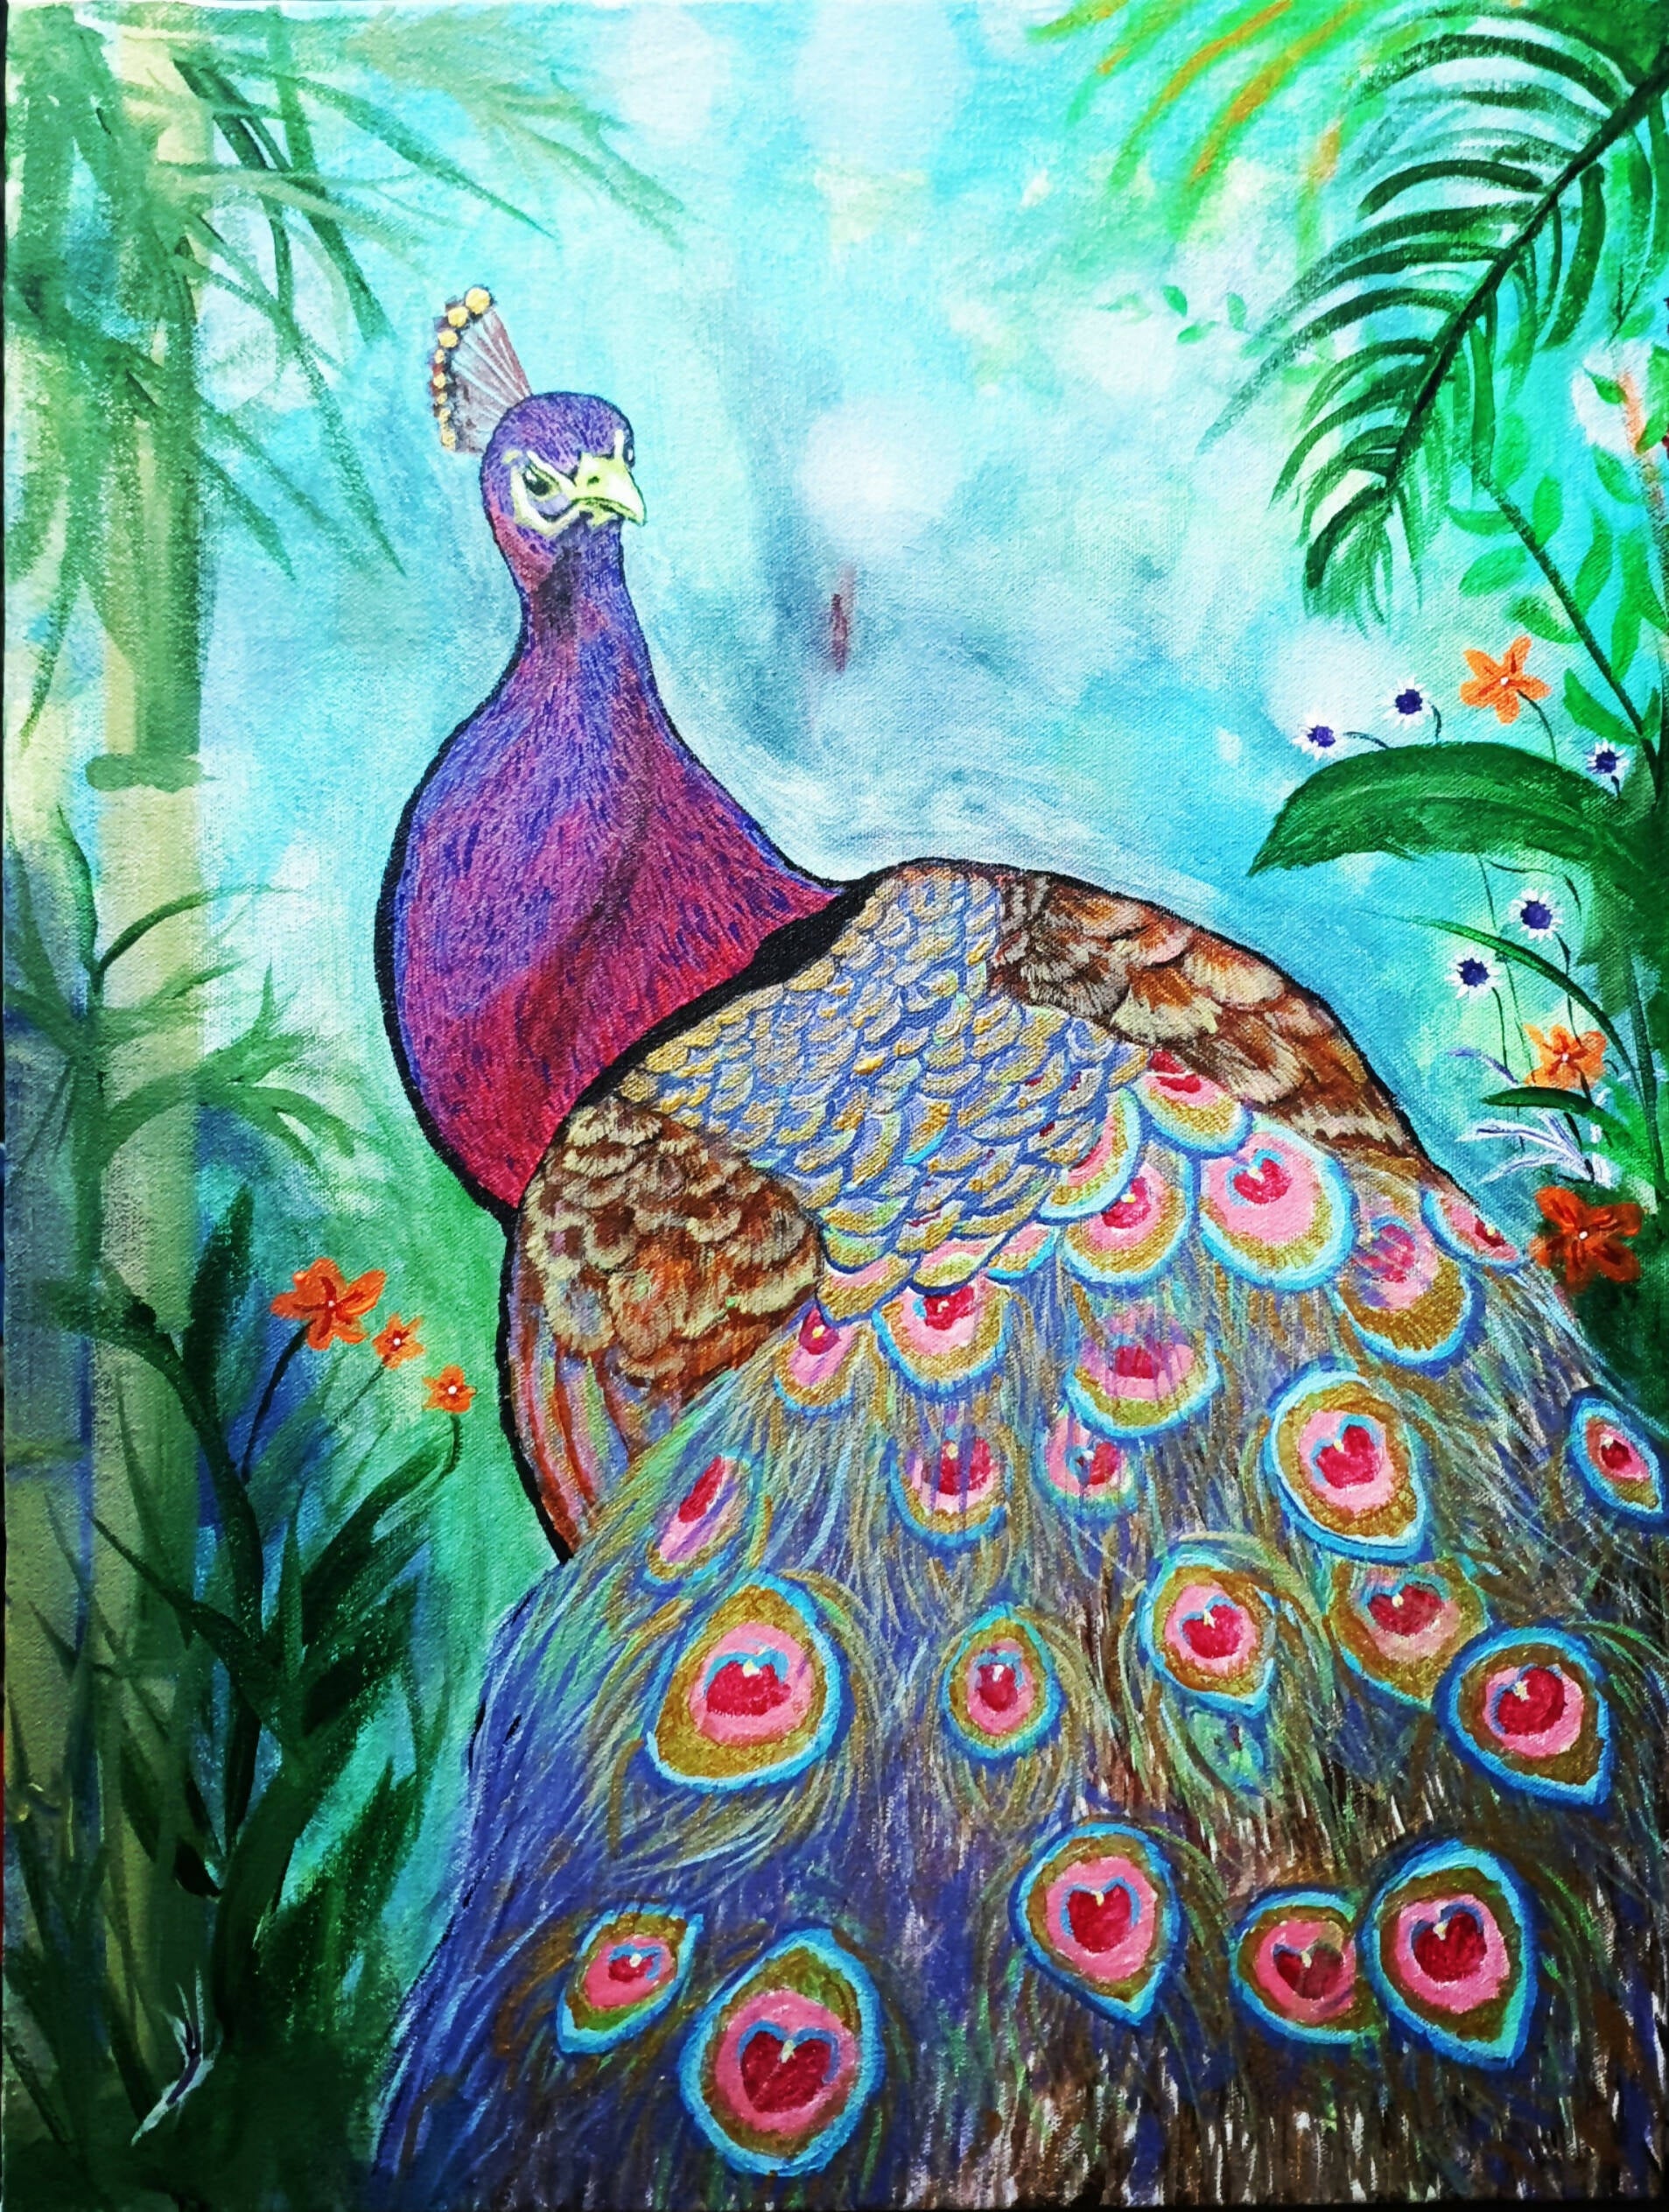 SenKoondhal - A Red Peacock